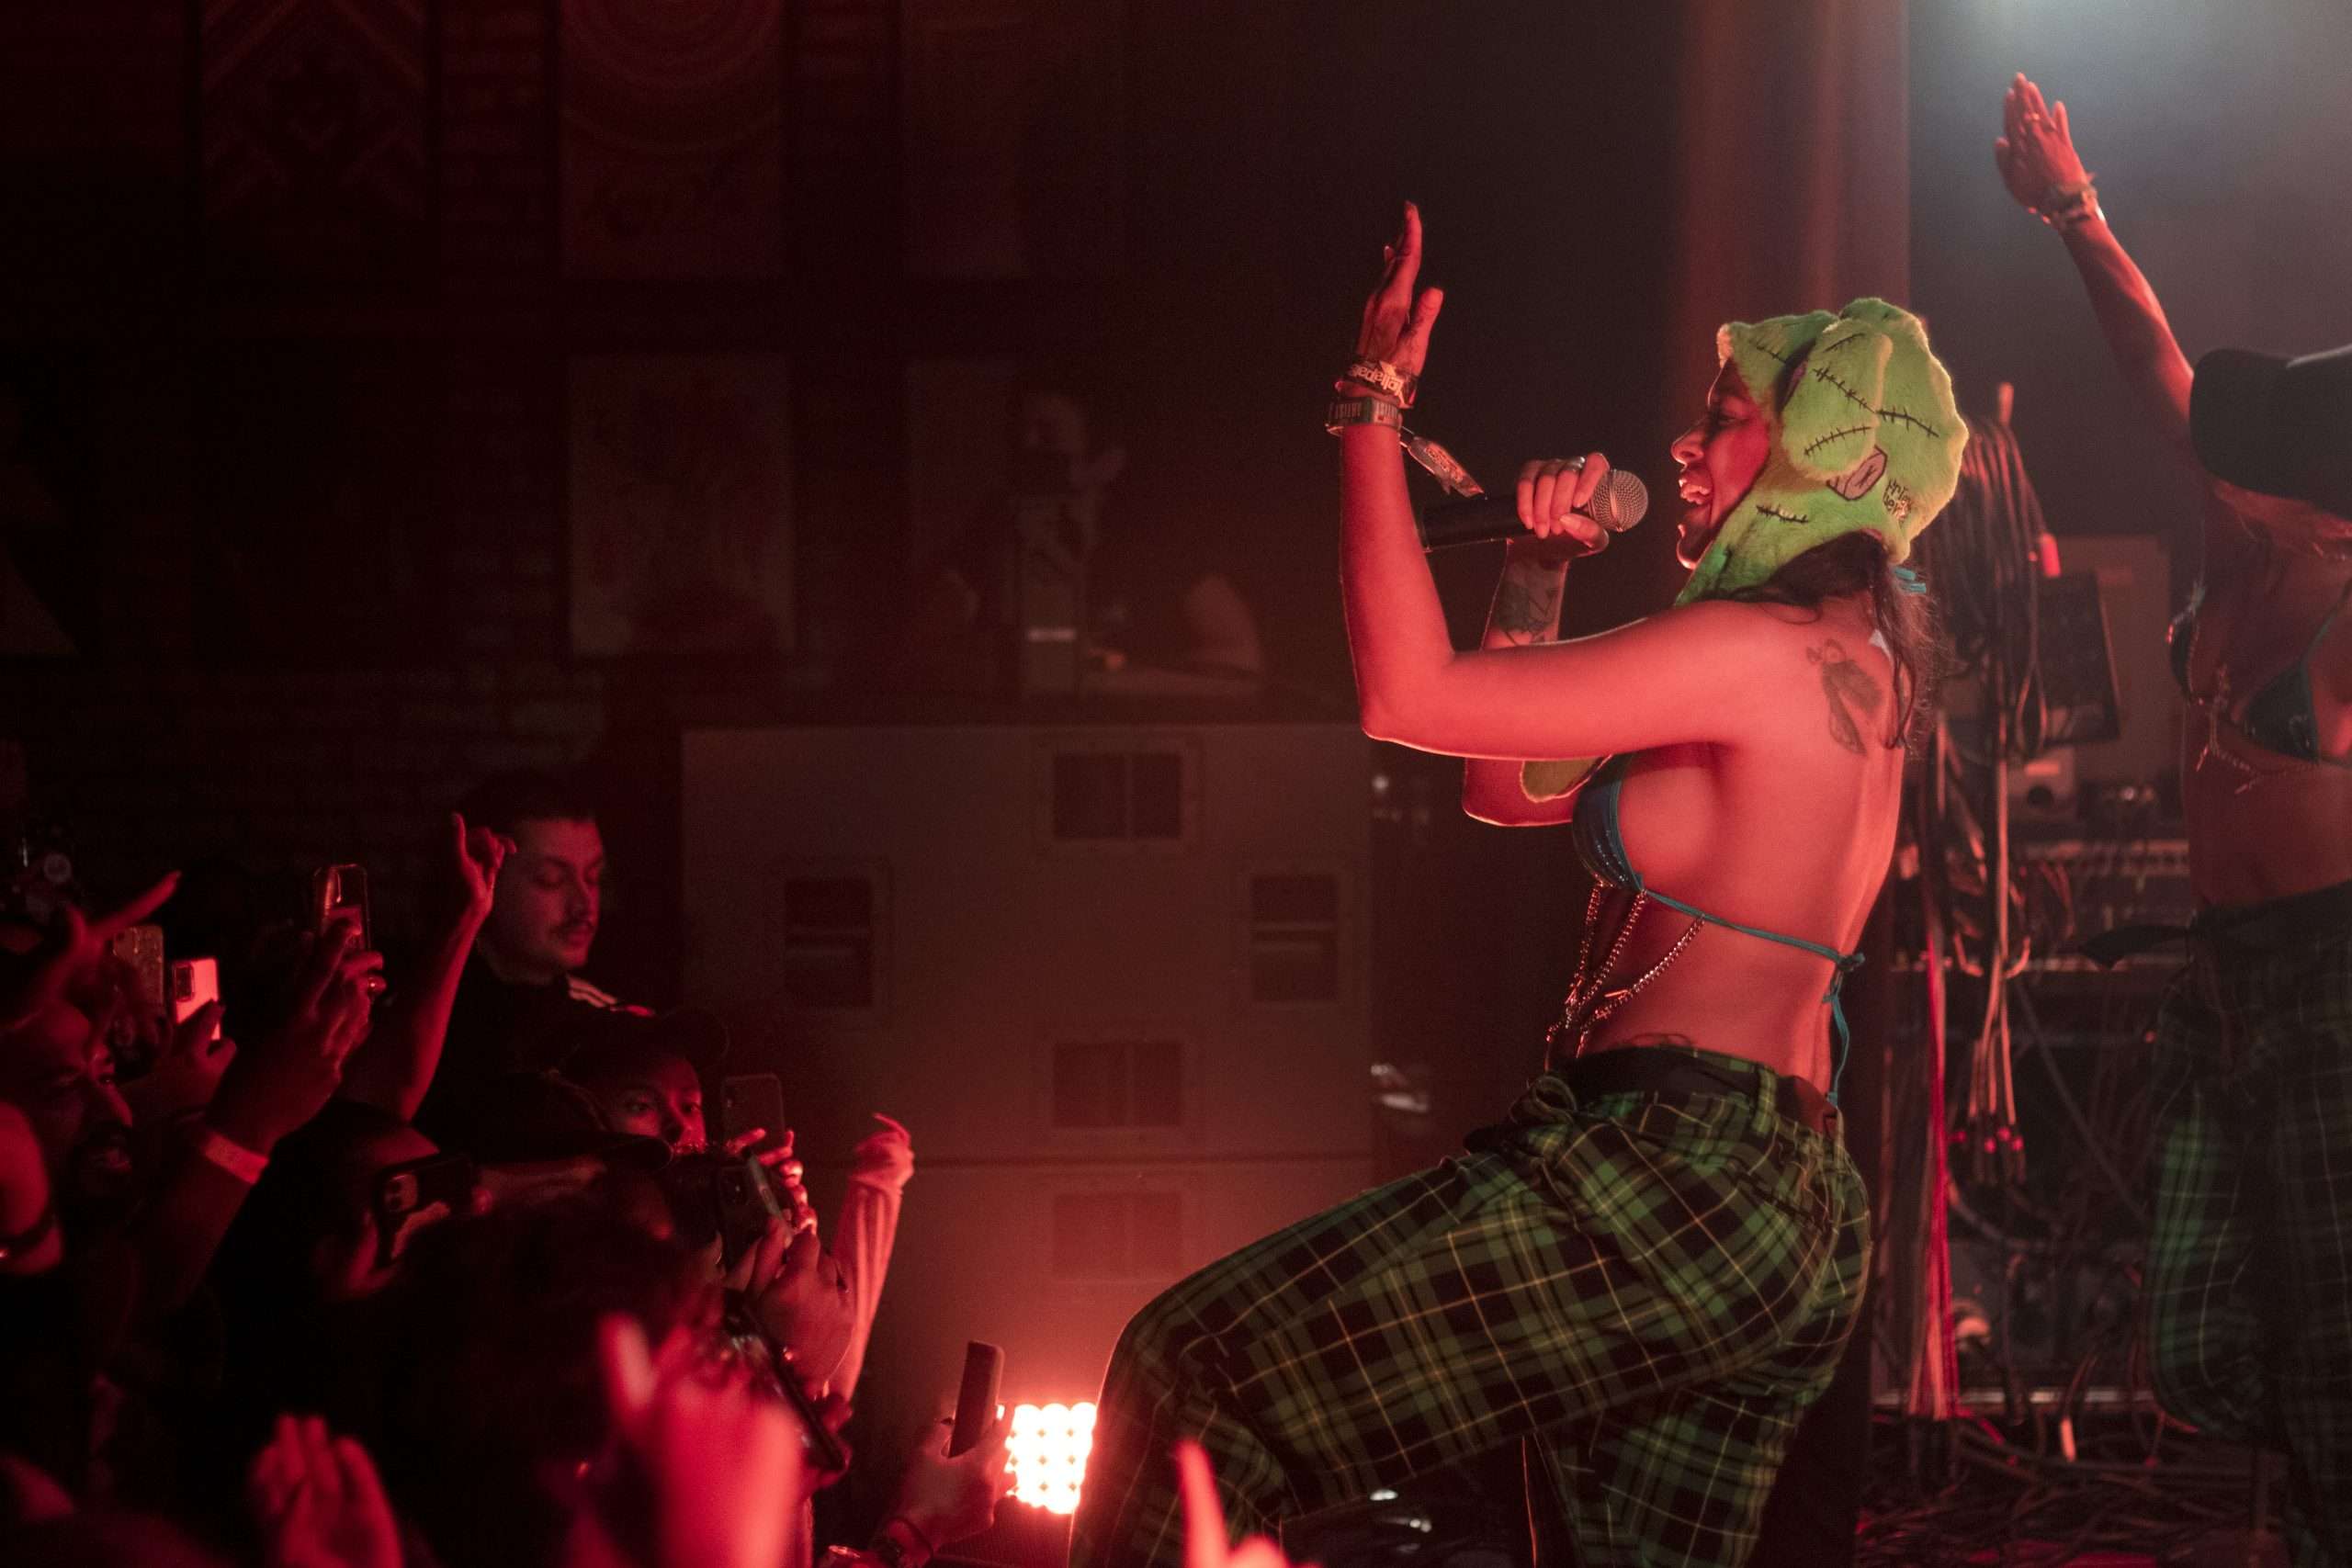 Princess Nokia - Official Lollapalooza Aftershow - Lincoln Hall - Chicago, IL - 08/01/2021 - Photo © 2021 by: Riley James